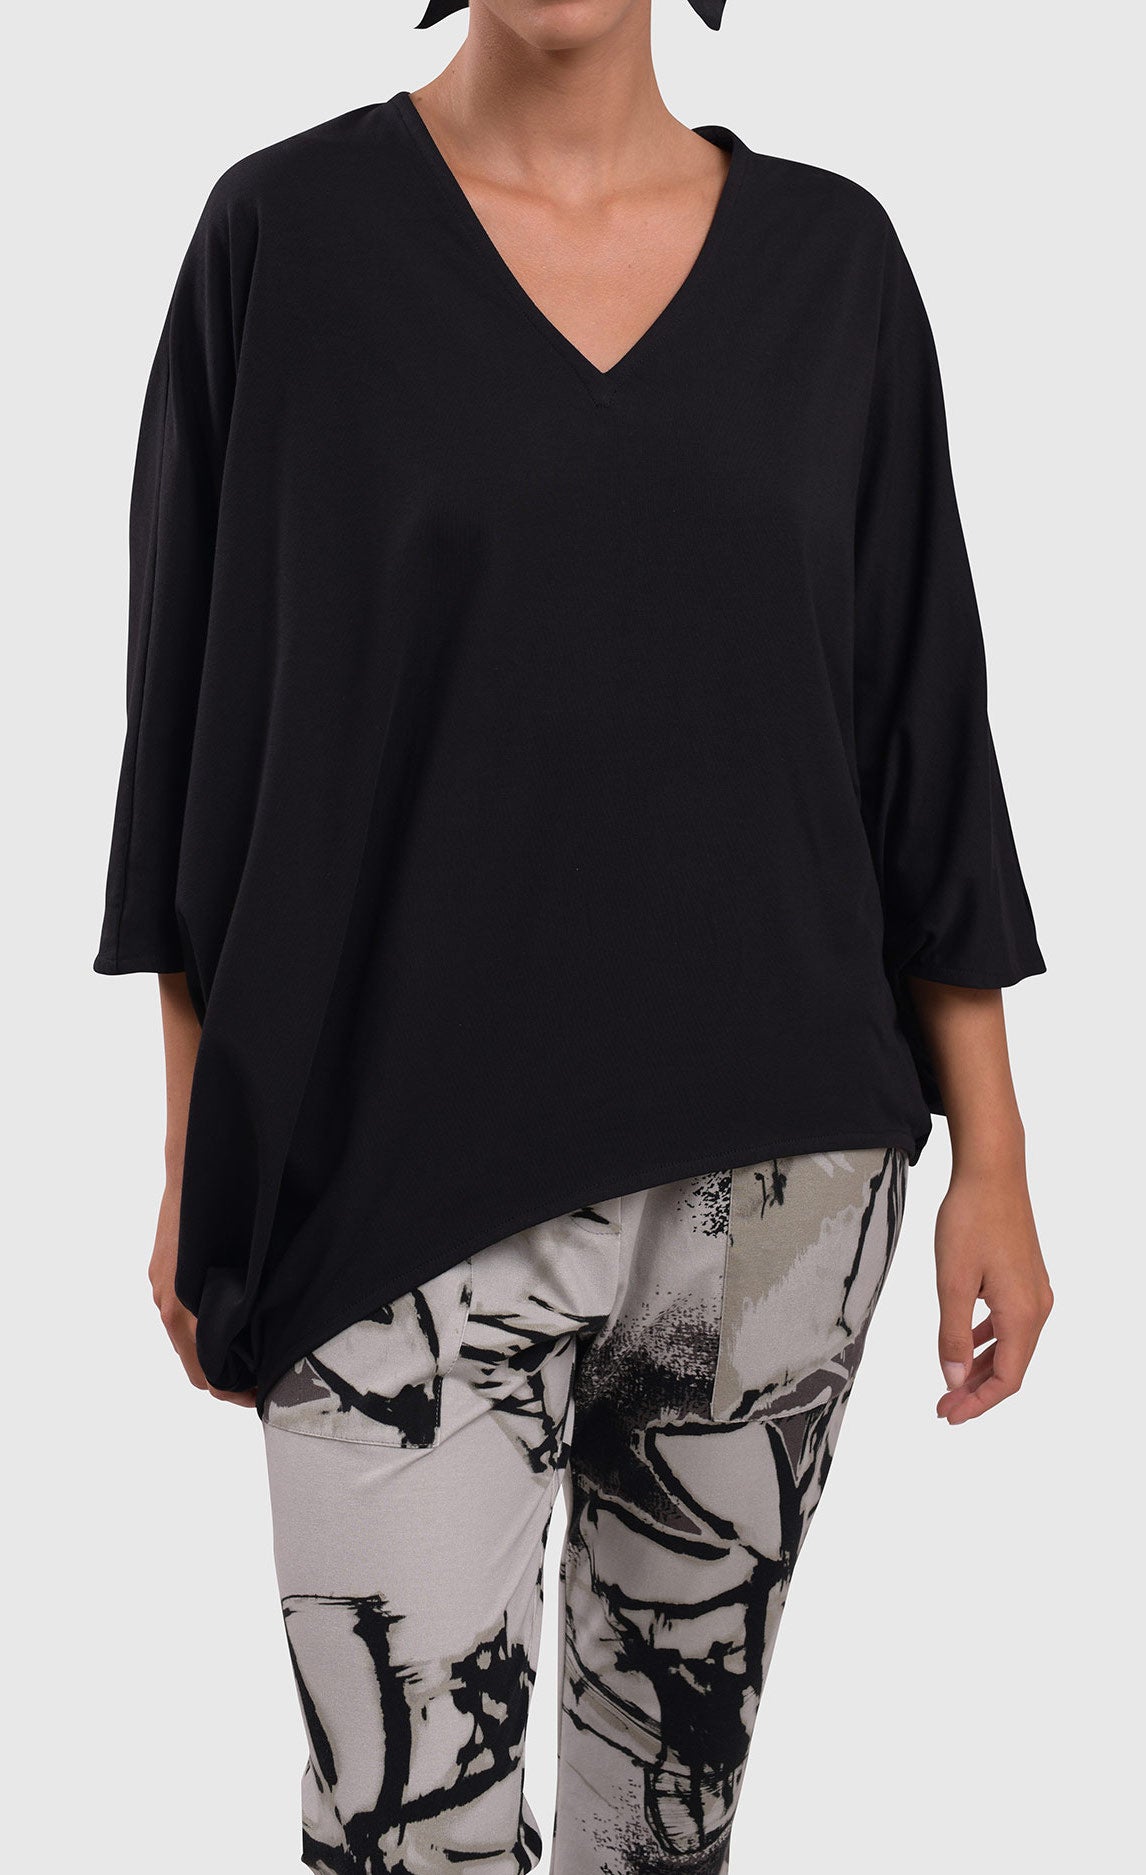 Front top half view of a woman wearing the alembika urban v neck black top and an alembika grey sketch pant. This top has drop shoulders, an oversized fit, 3/4 length dolman sleeves, and an asymmetrical hem.